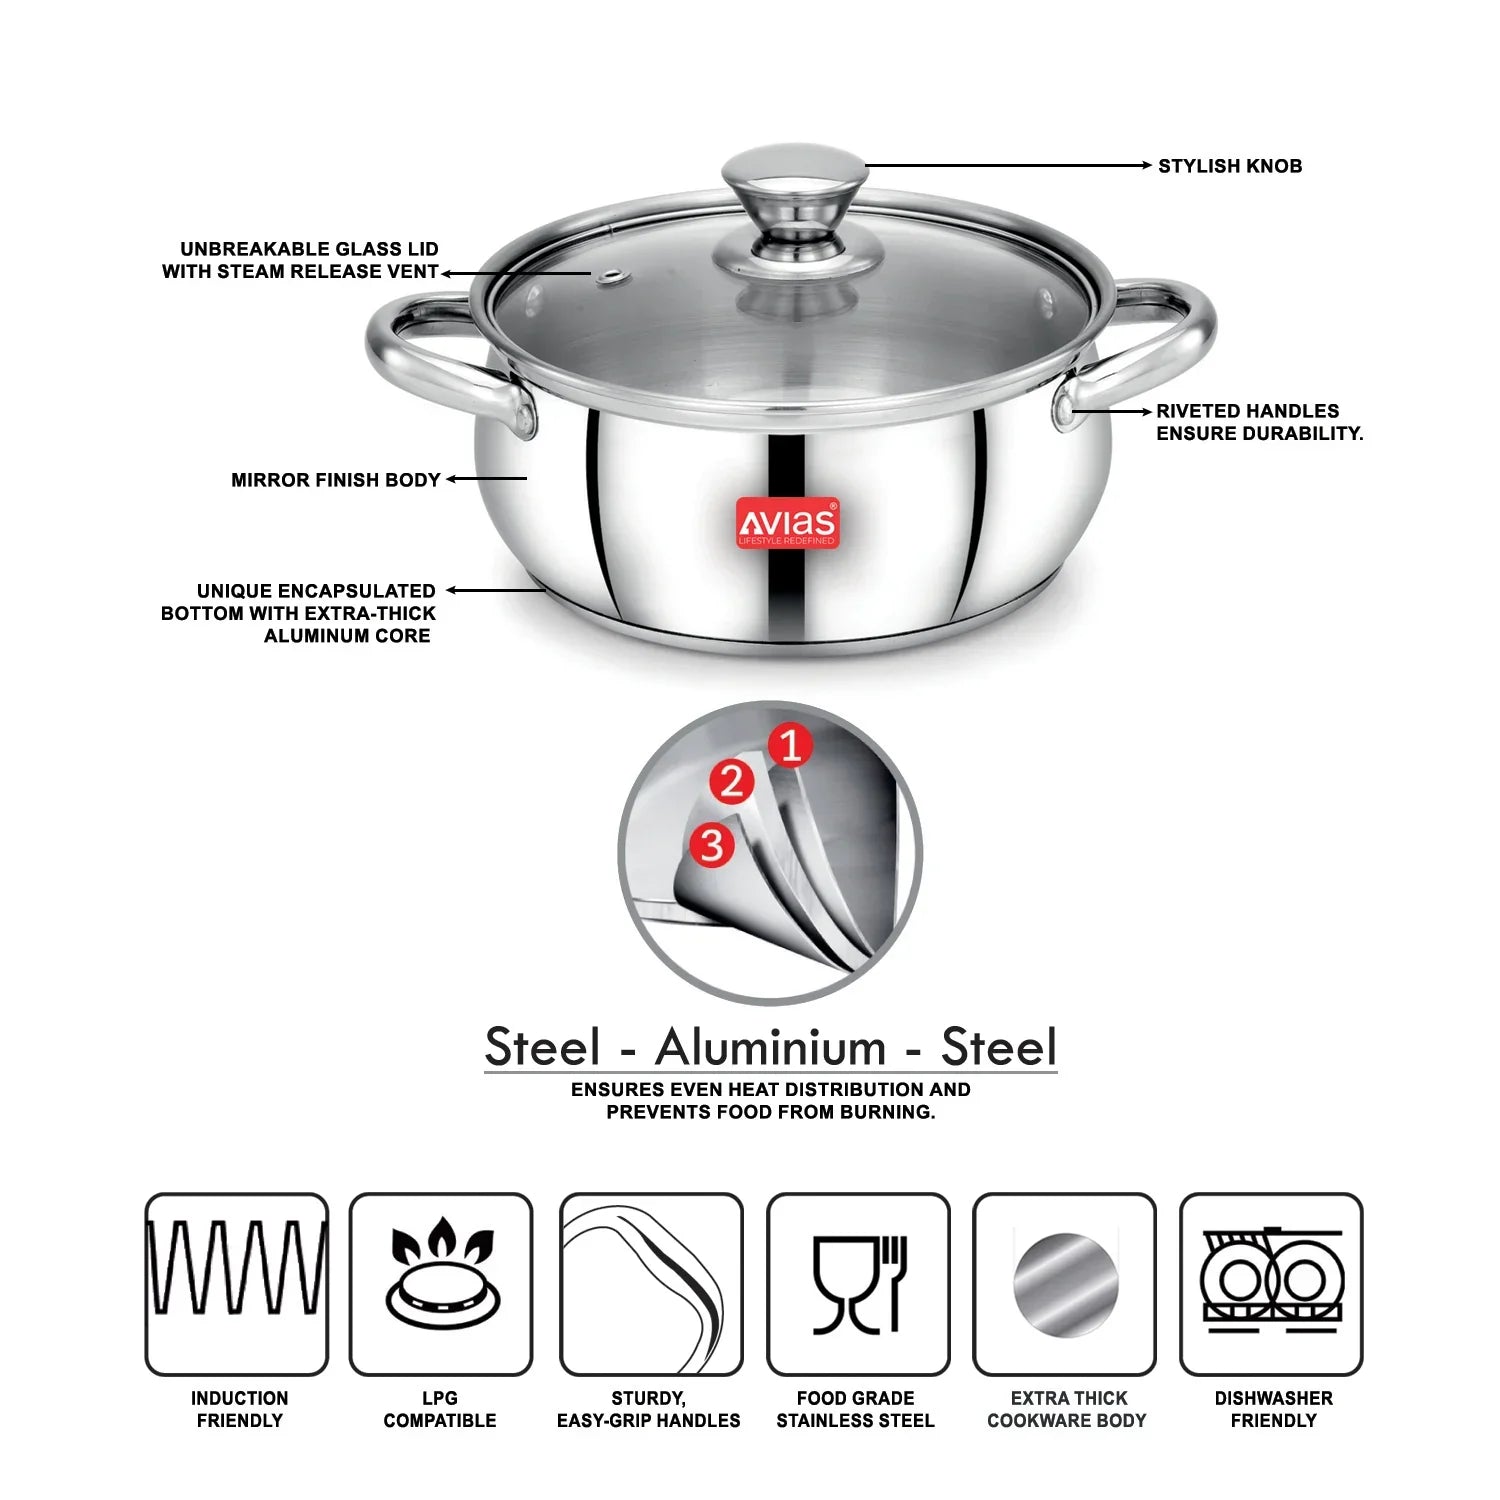 AVIAS Inox IB stainless steel cookpot with glass lid features and compatibility